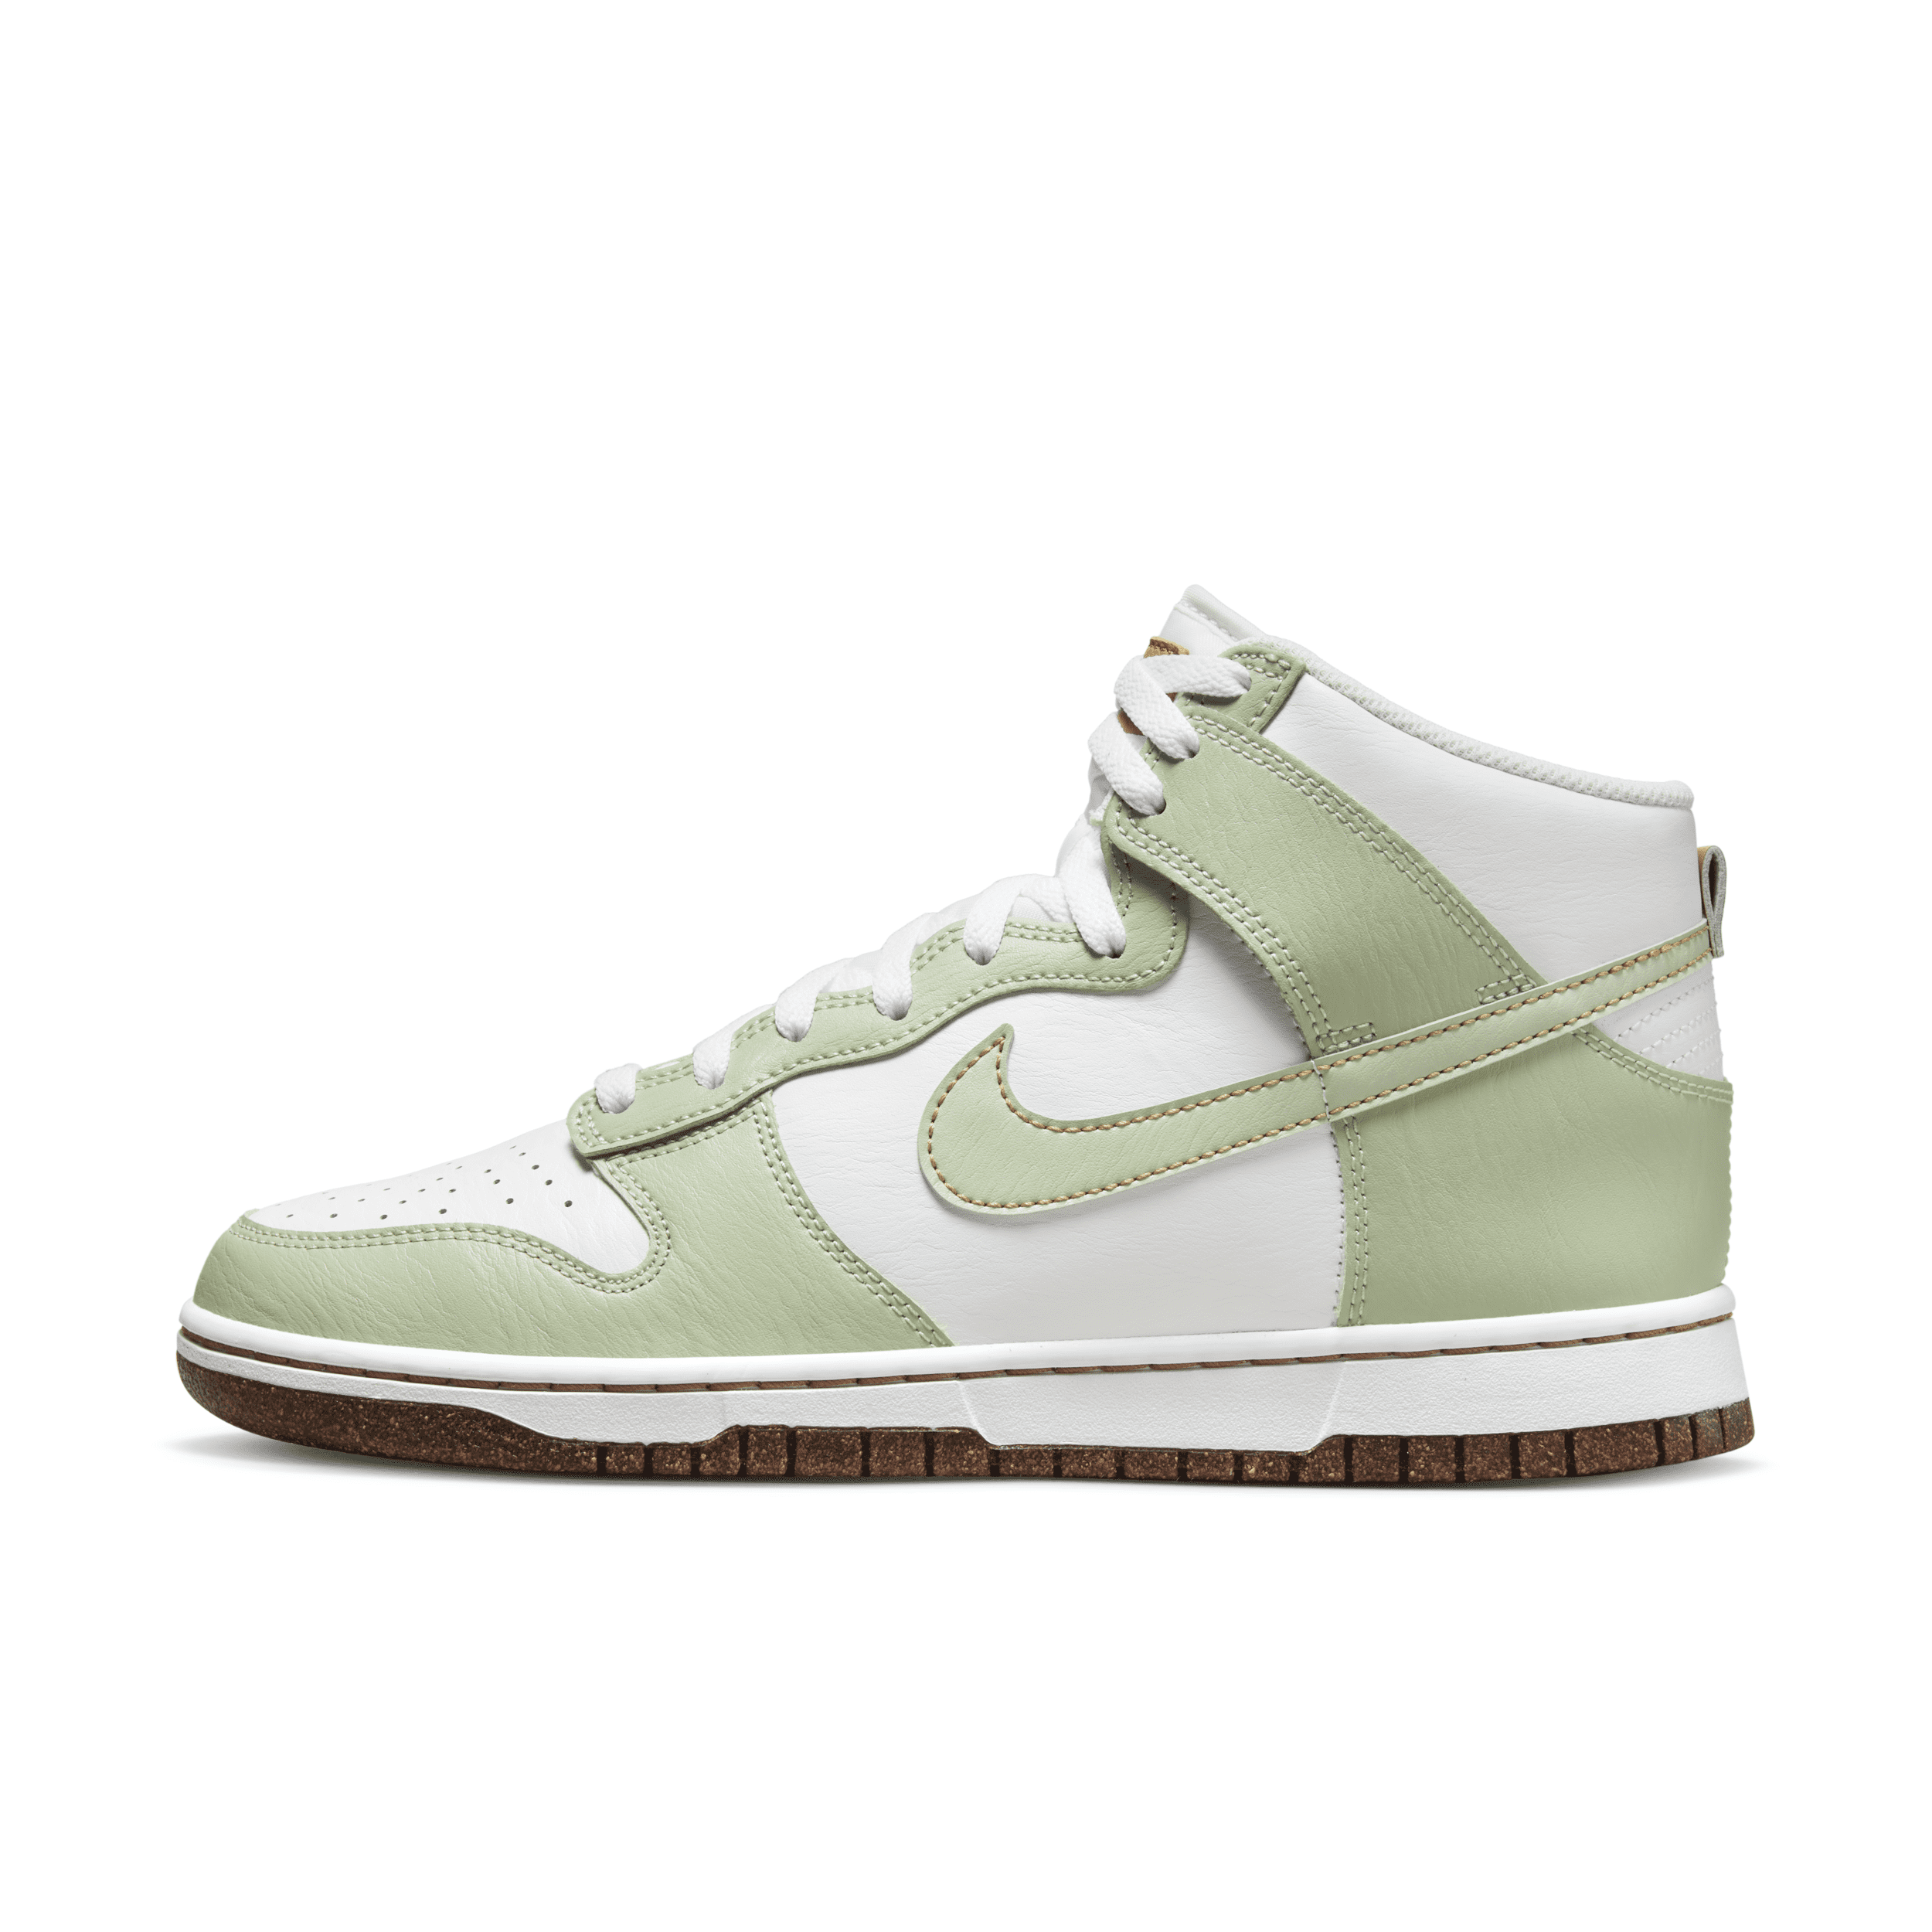 Nike Men's Dunk High Retro SE Shoes in Green, Size: 9.5 | DQ7680-300